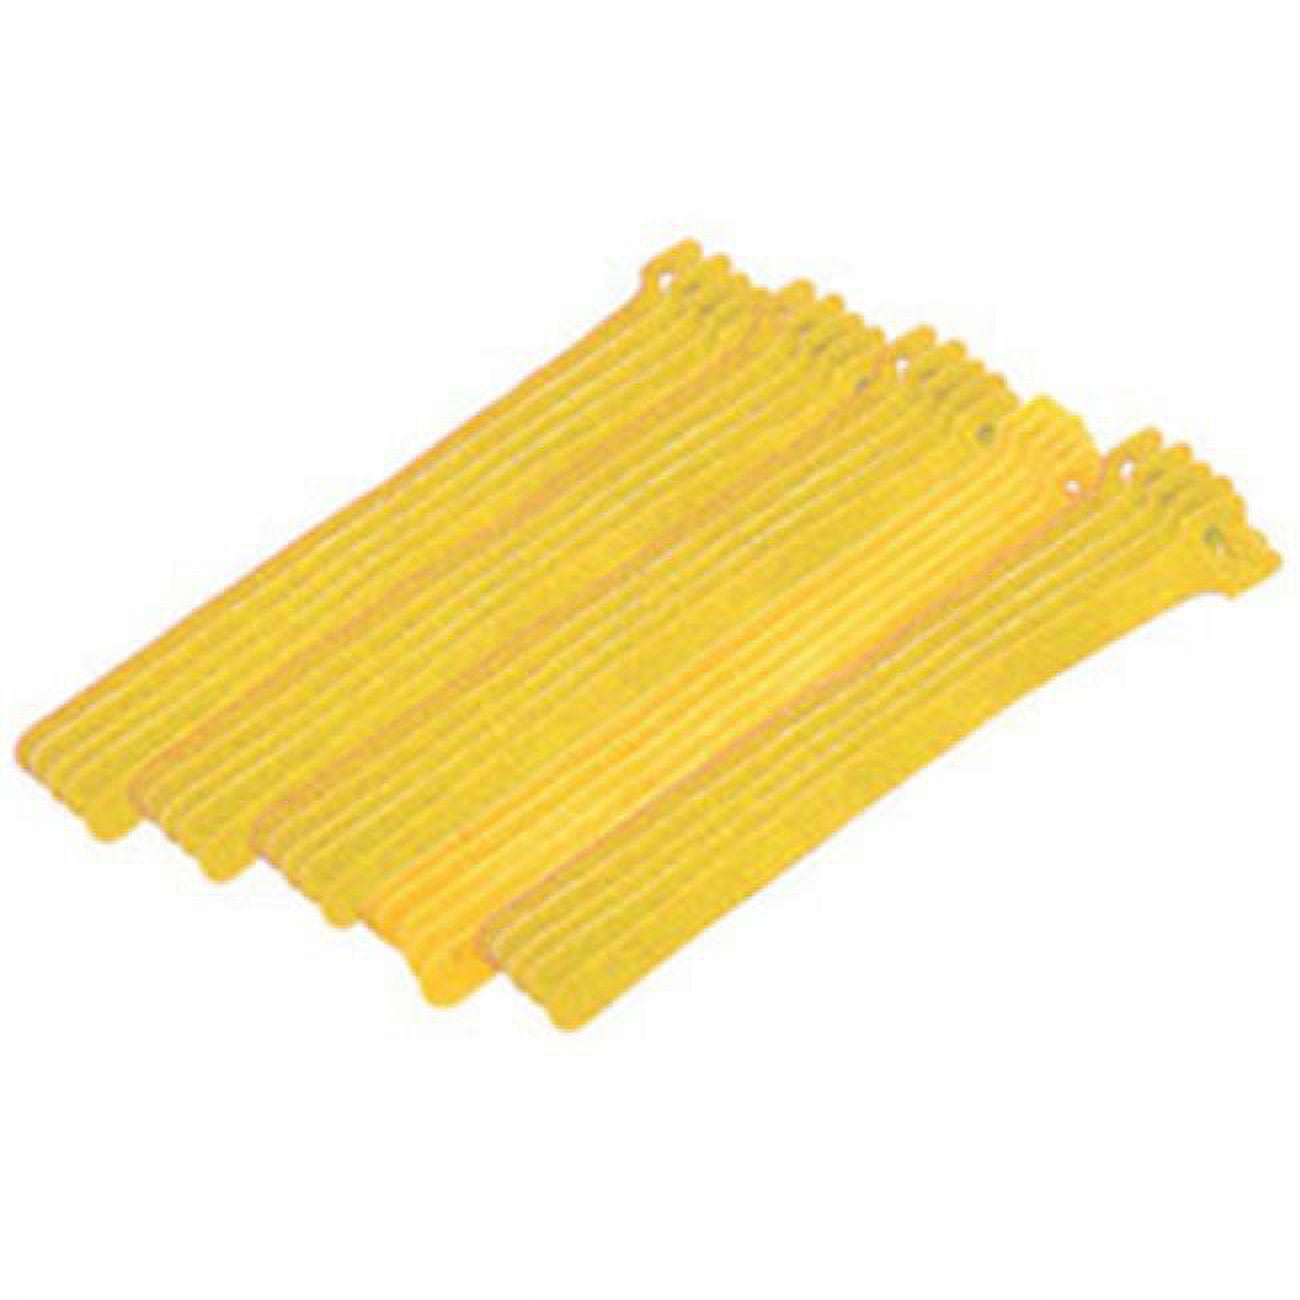 Picture of CableWholesale 30CT-08180 0.50 x 8 in. Yellow Hook and Loop Cable Strap with Eye - Pack of 25